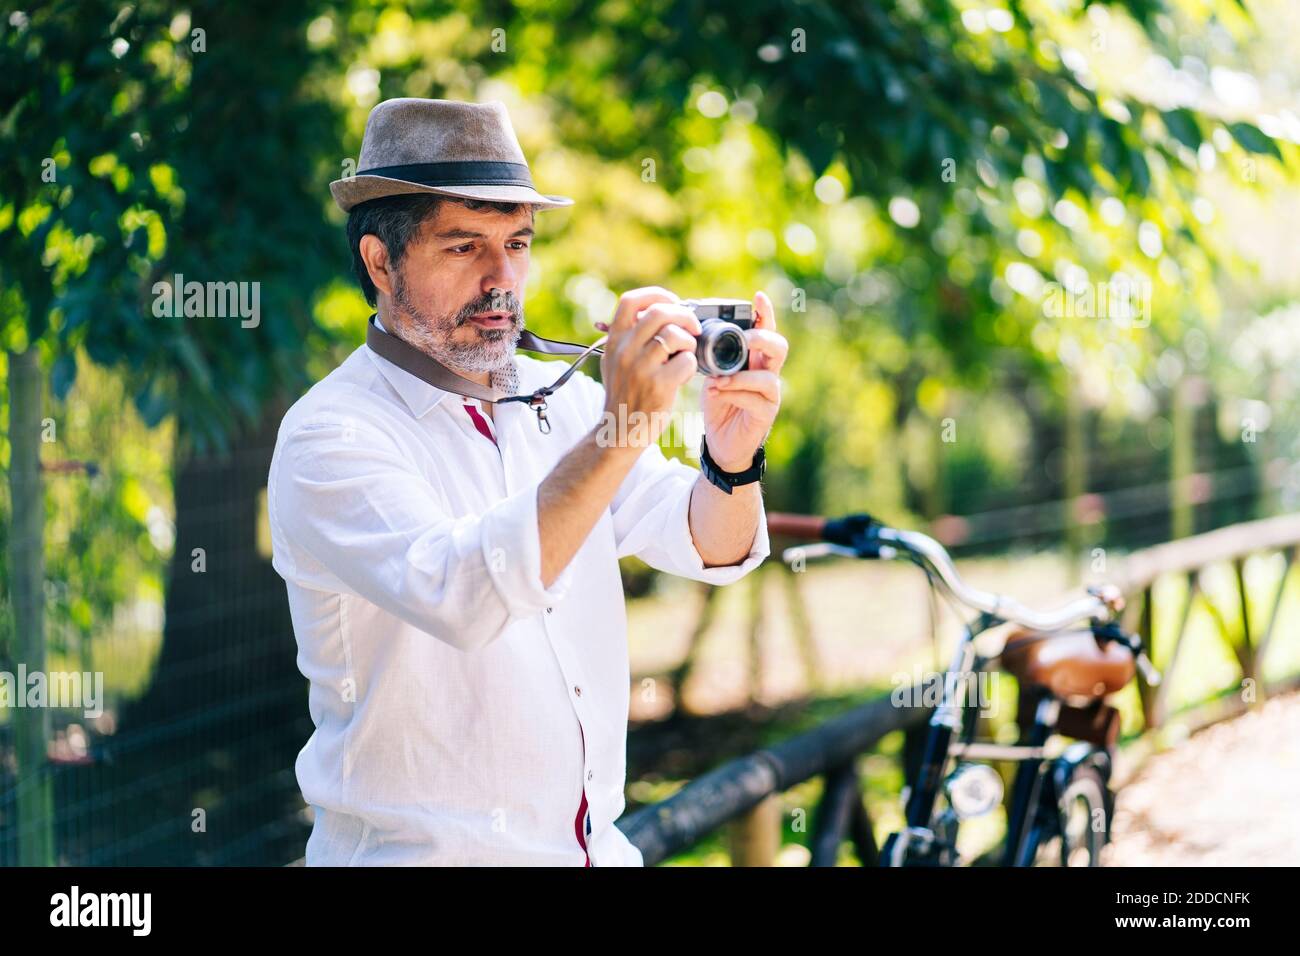 Mature man clicking picture with camera while standing in park Stock Photo